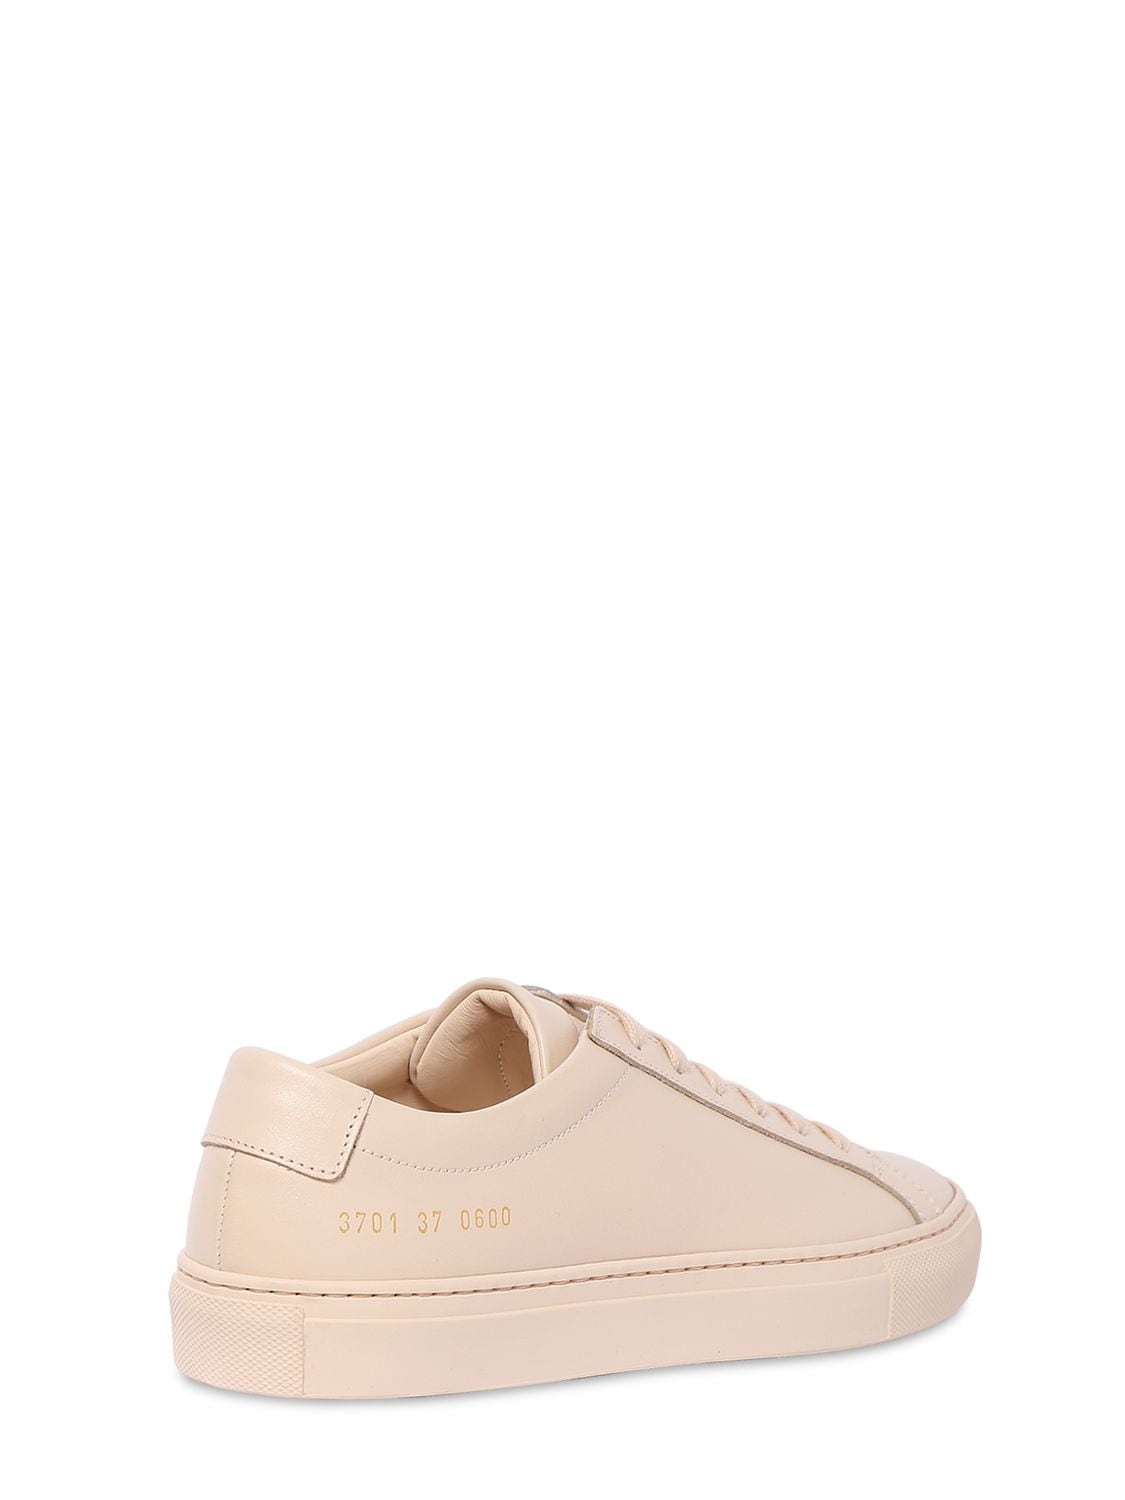 Common Projects 20mm Original Achilles Leather Sneakers In Pink | ModeSens